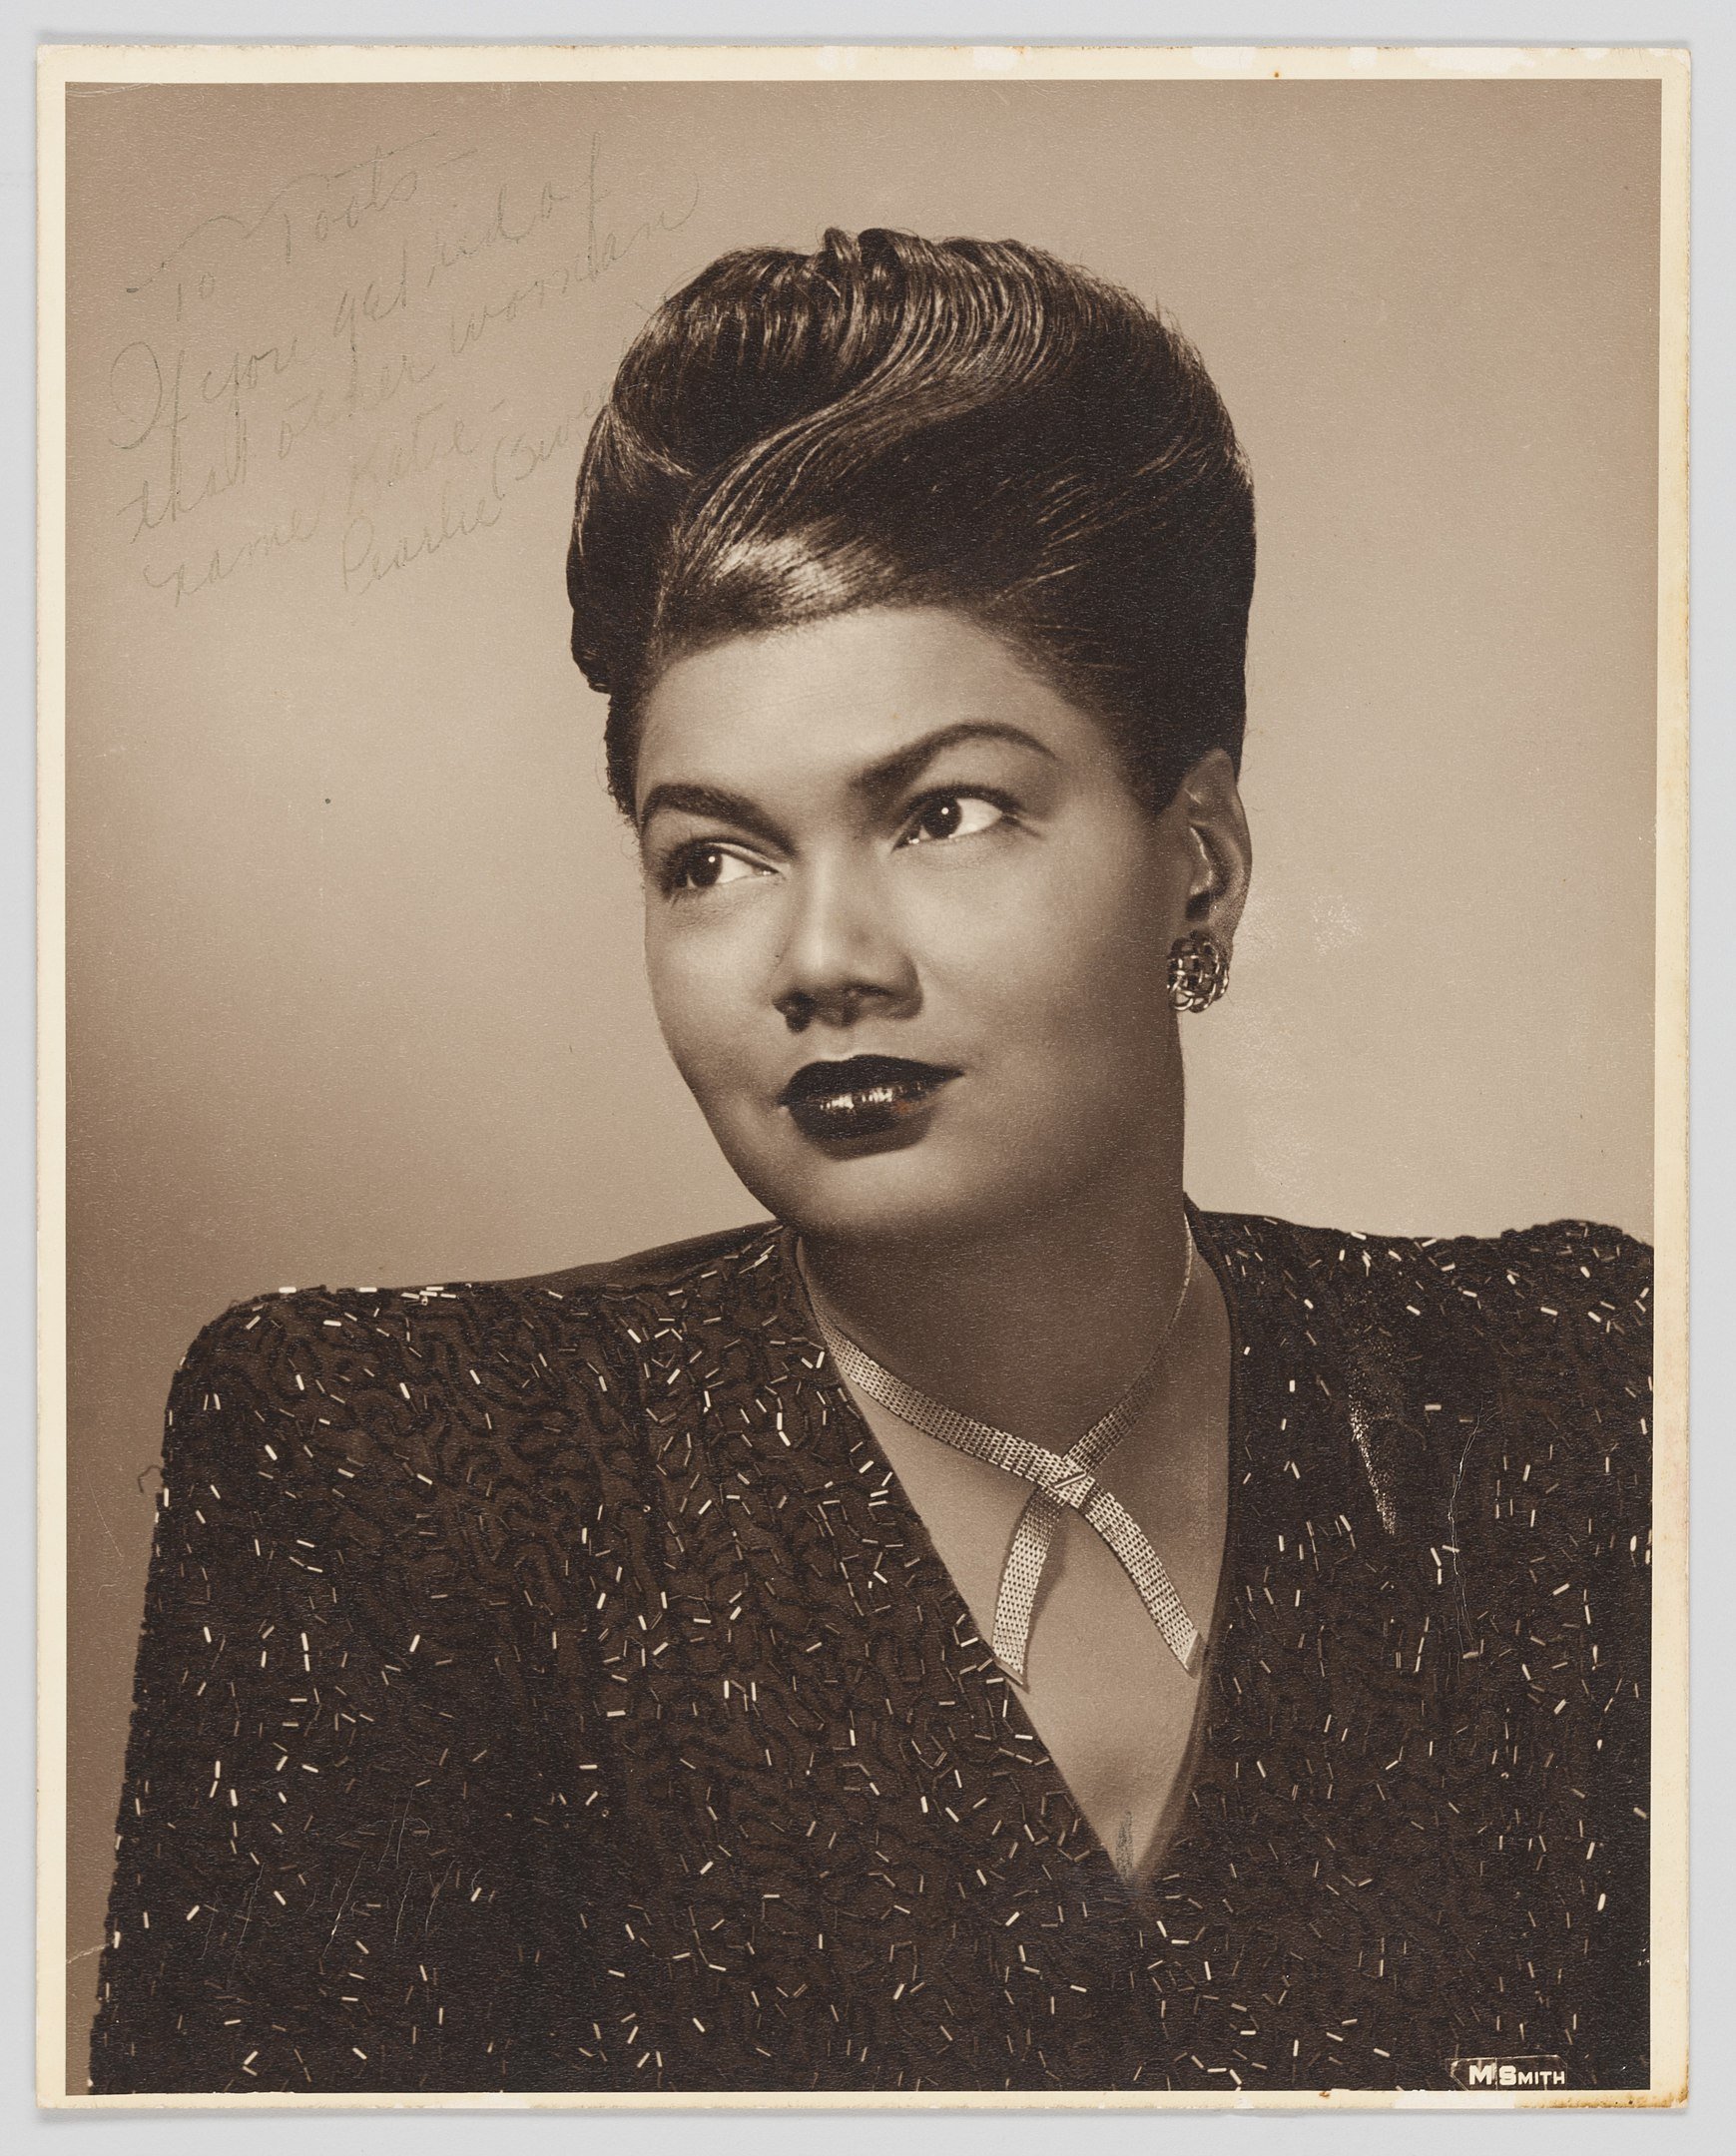 A black and white photo of Pearl Bailey taken in 1960 with an autograph of the actress | Photo, Wikimedia Commons Images, By Marvin Smith CC0